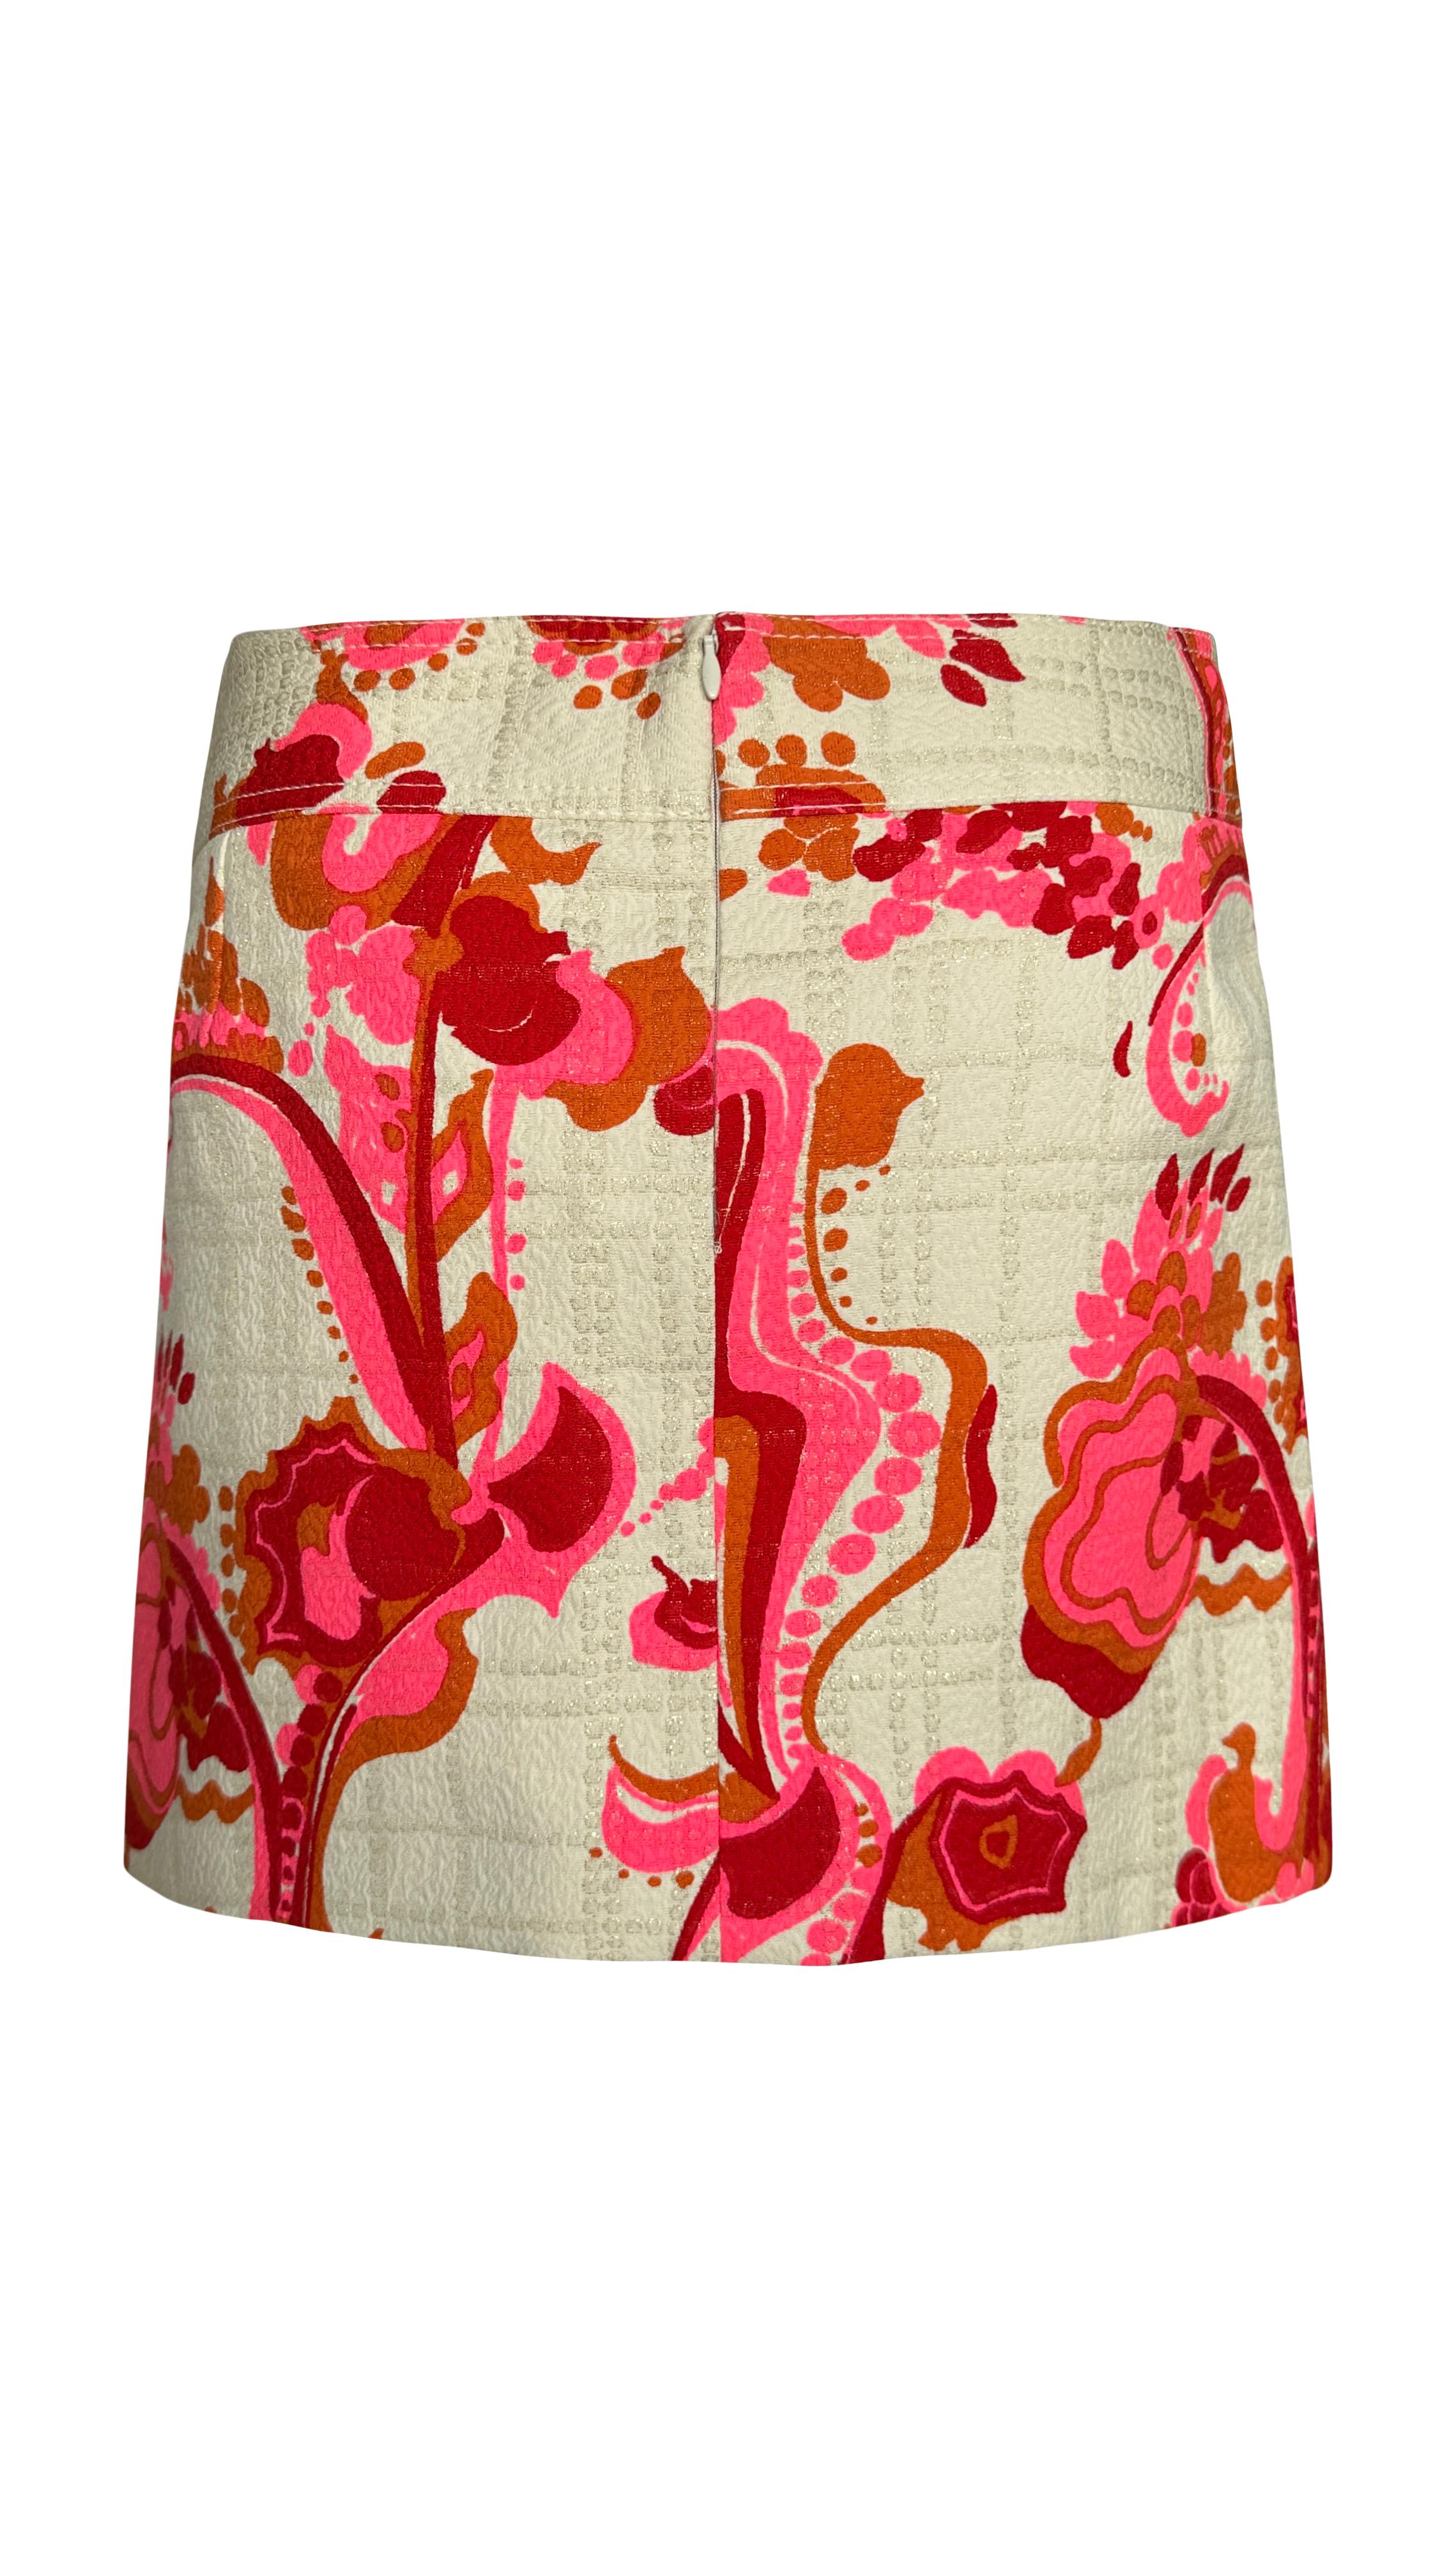 Women's Dolce and Gabbana ss 2004 runway embellished floral mini skirt 